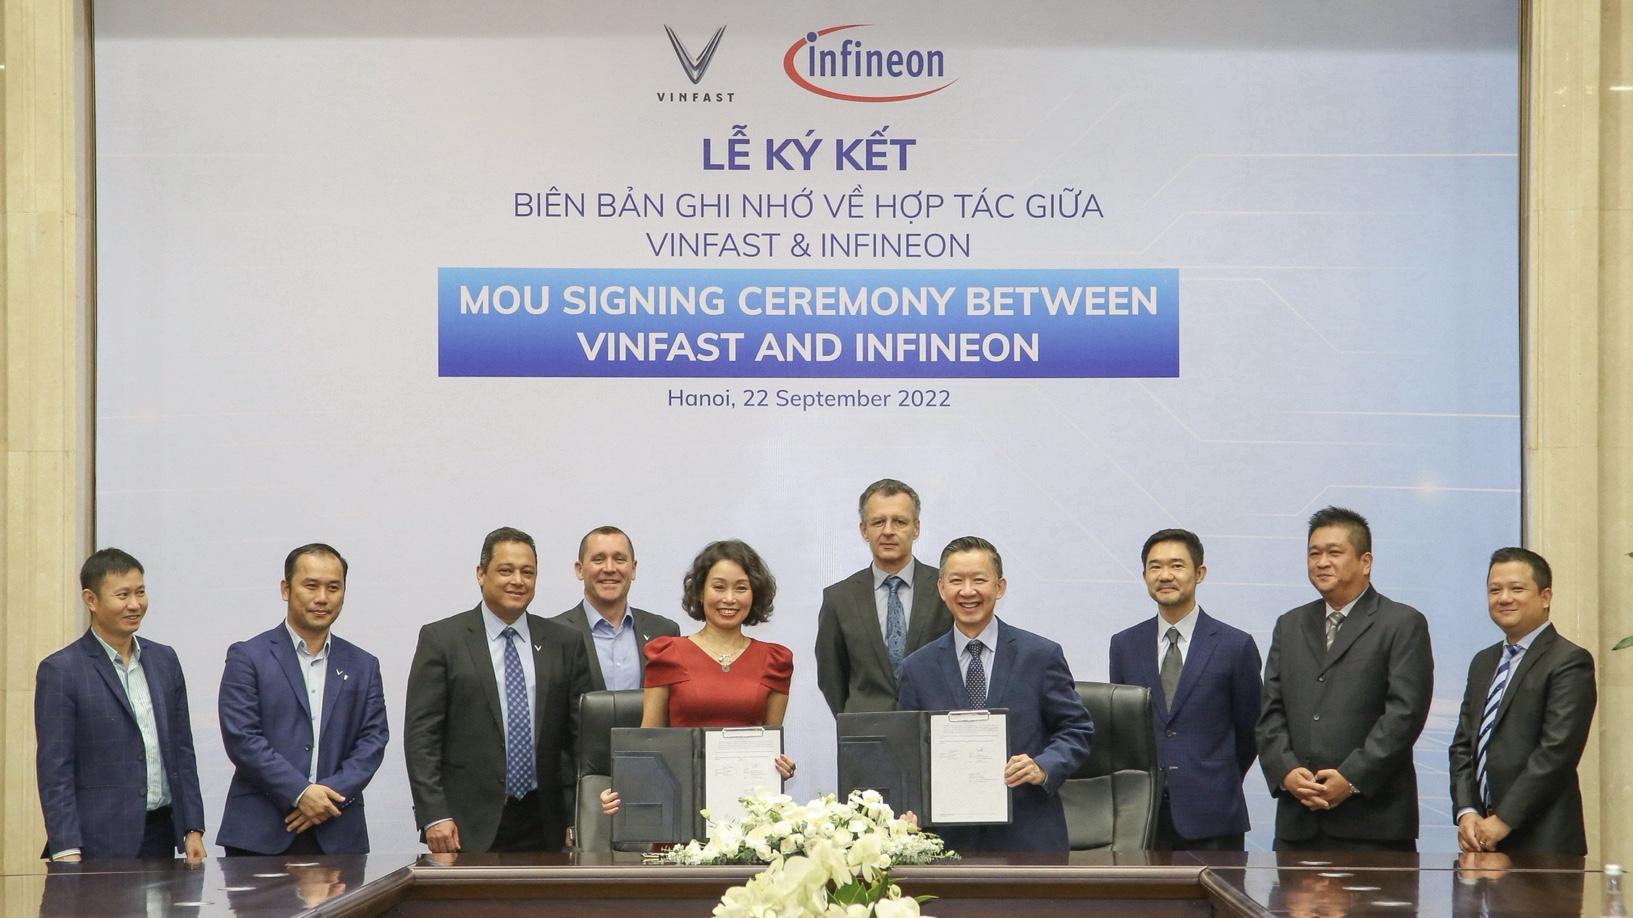 VinFast And Infineon Extend Partnership In The Field Of Electromobility